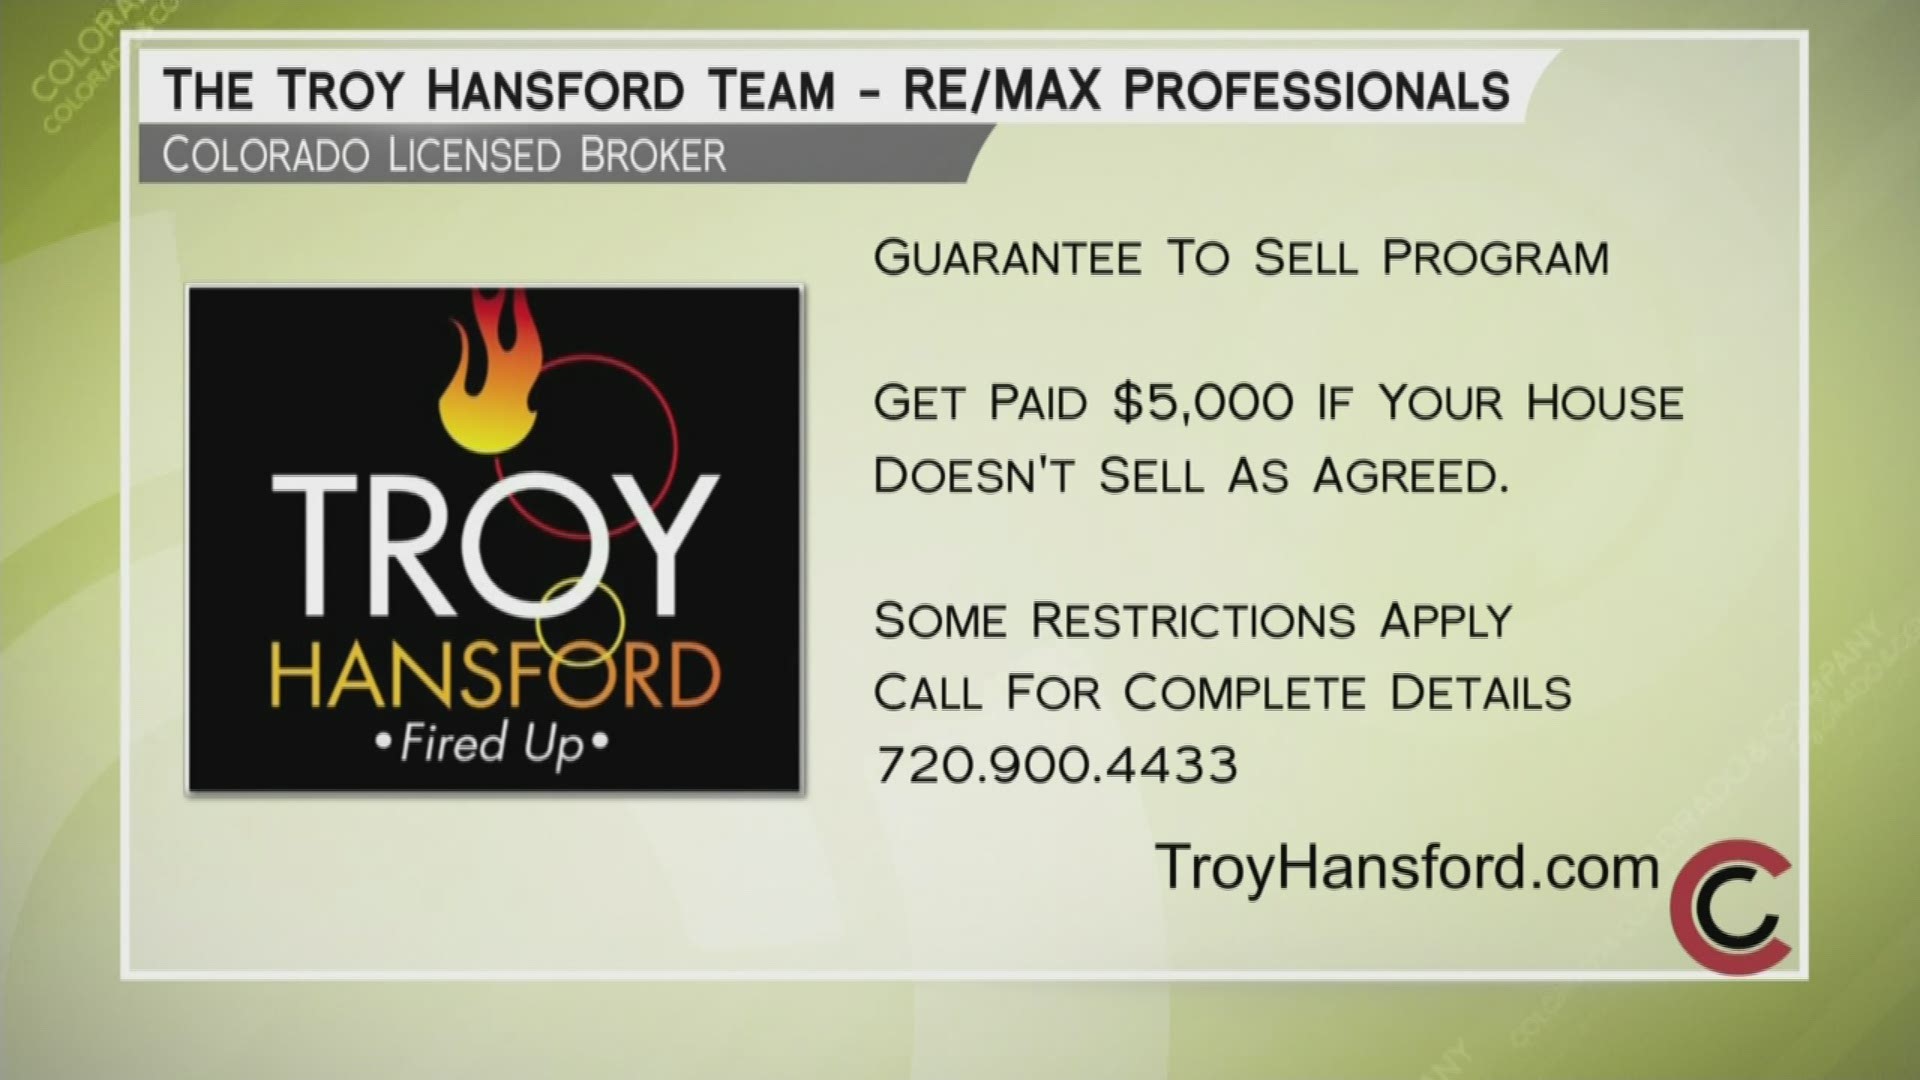 Visit TroyHansford.com to learn about Troy's $5,000 Sell Your Home Guarantee. Get started today by calling 720.900.4433.